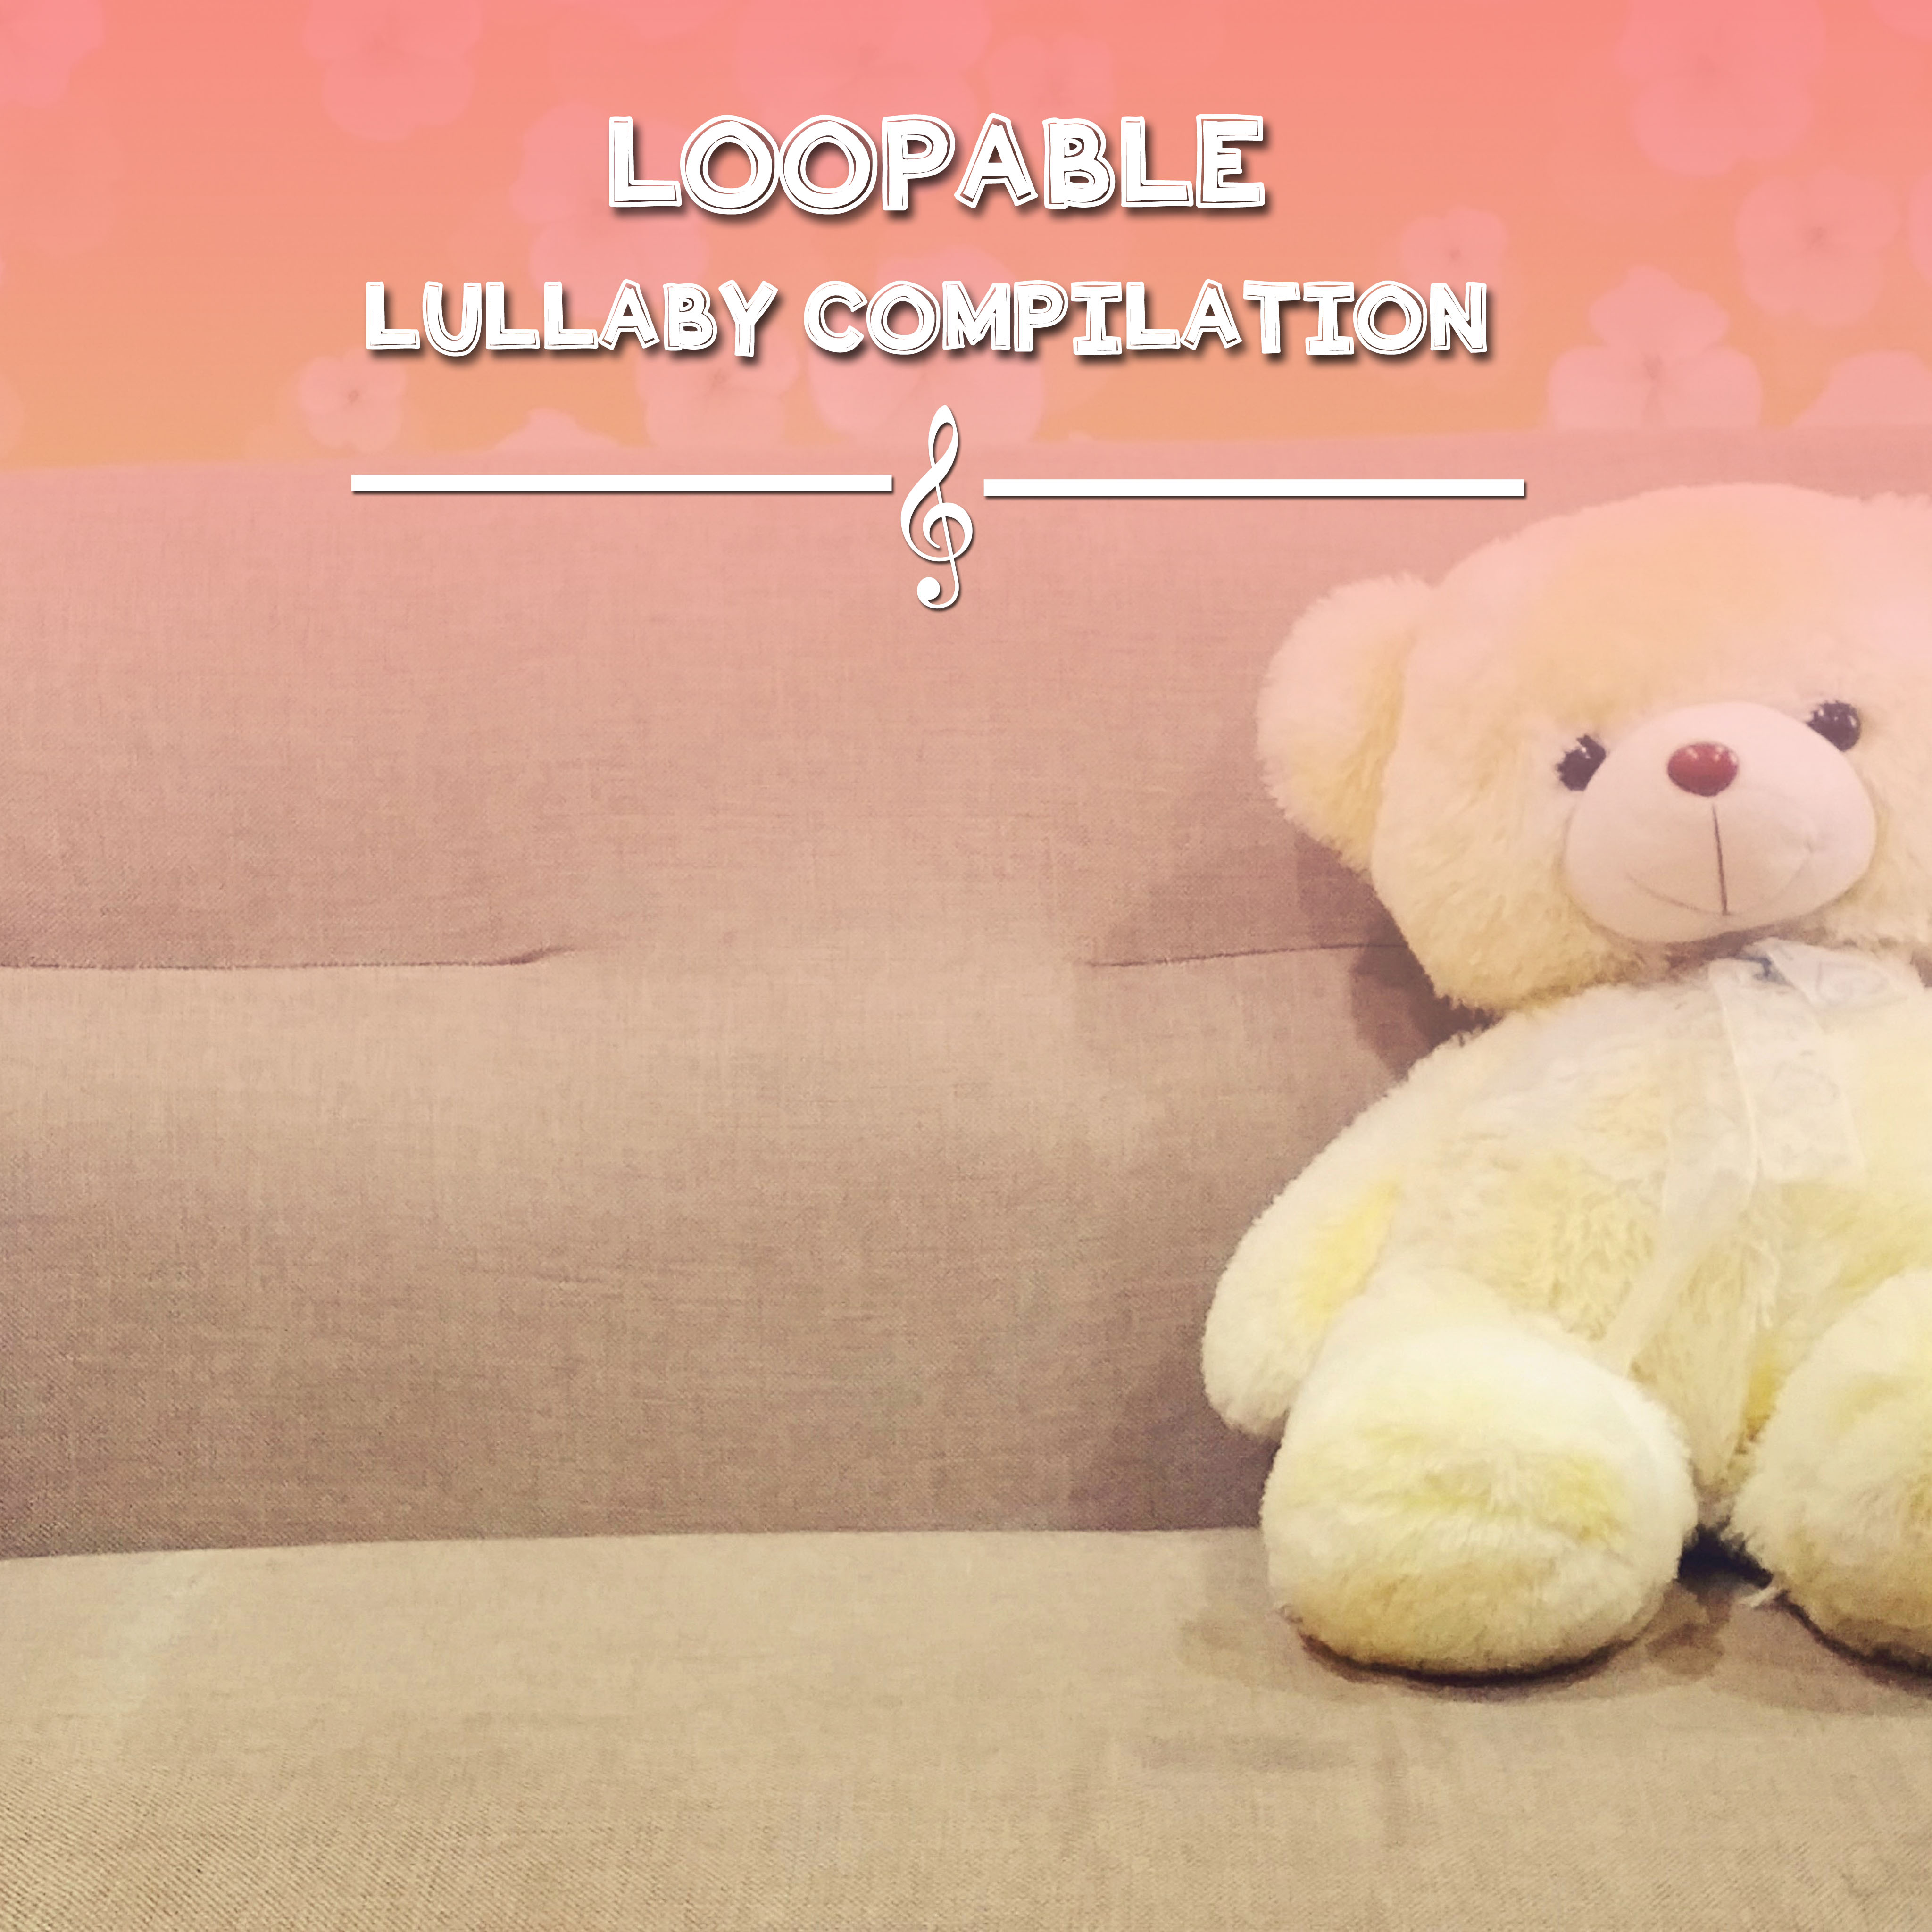 2018 A Loopable Lullaby Compilation